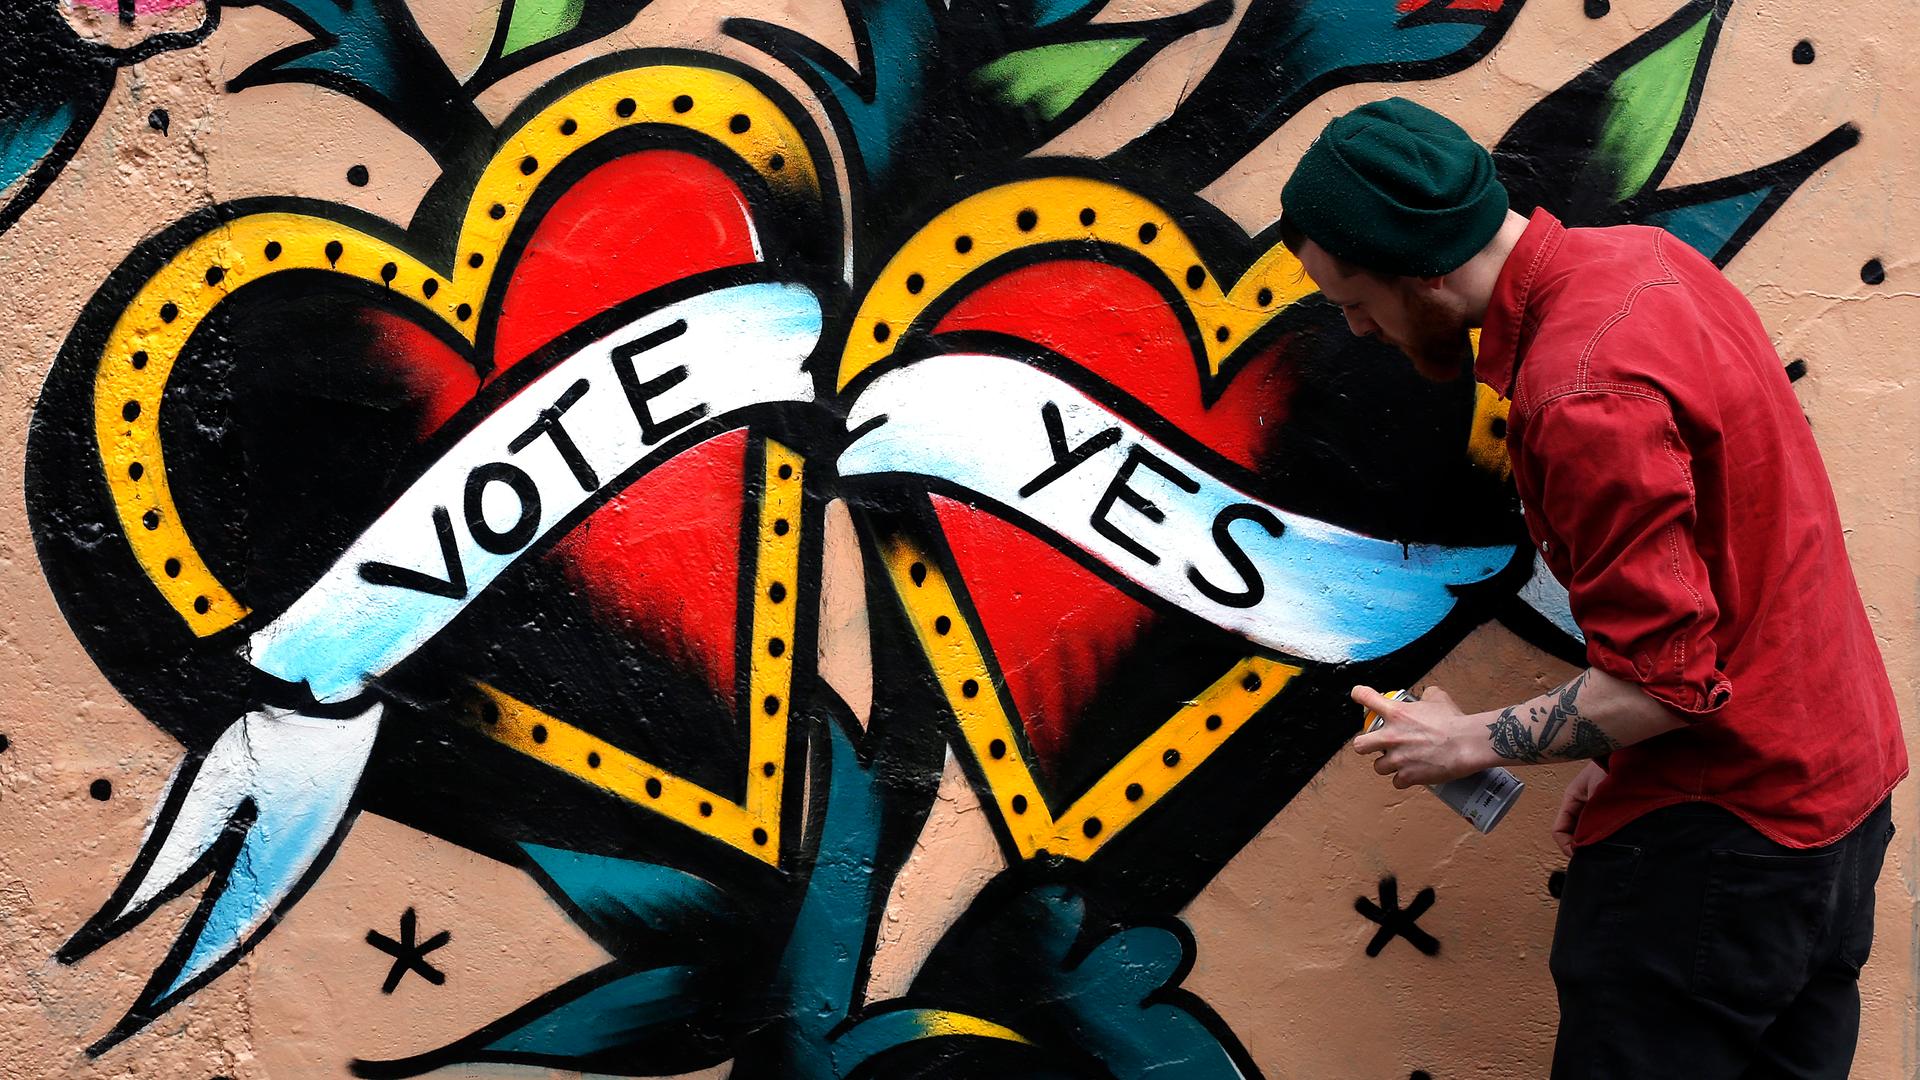 A graffiti artist finishes a Yes campaign piece in central Dublin on May 20, 2015. Irish Prime Minister Enda Kenny said that Ireland must seize its opportunity to become the first country to approve same-sex marriage in a popular vote when it holds a refe